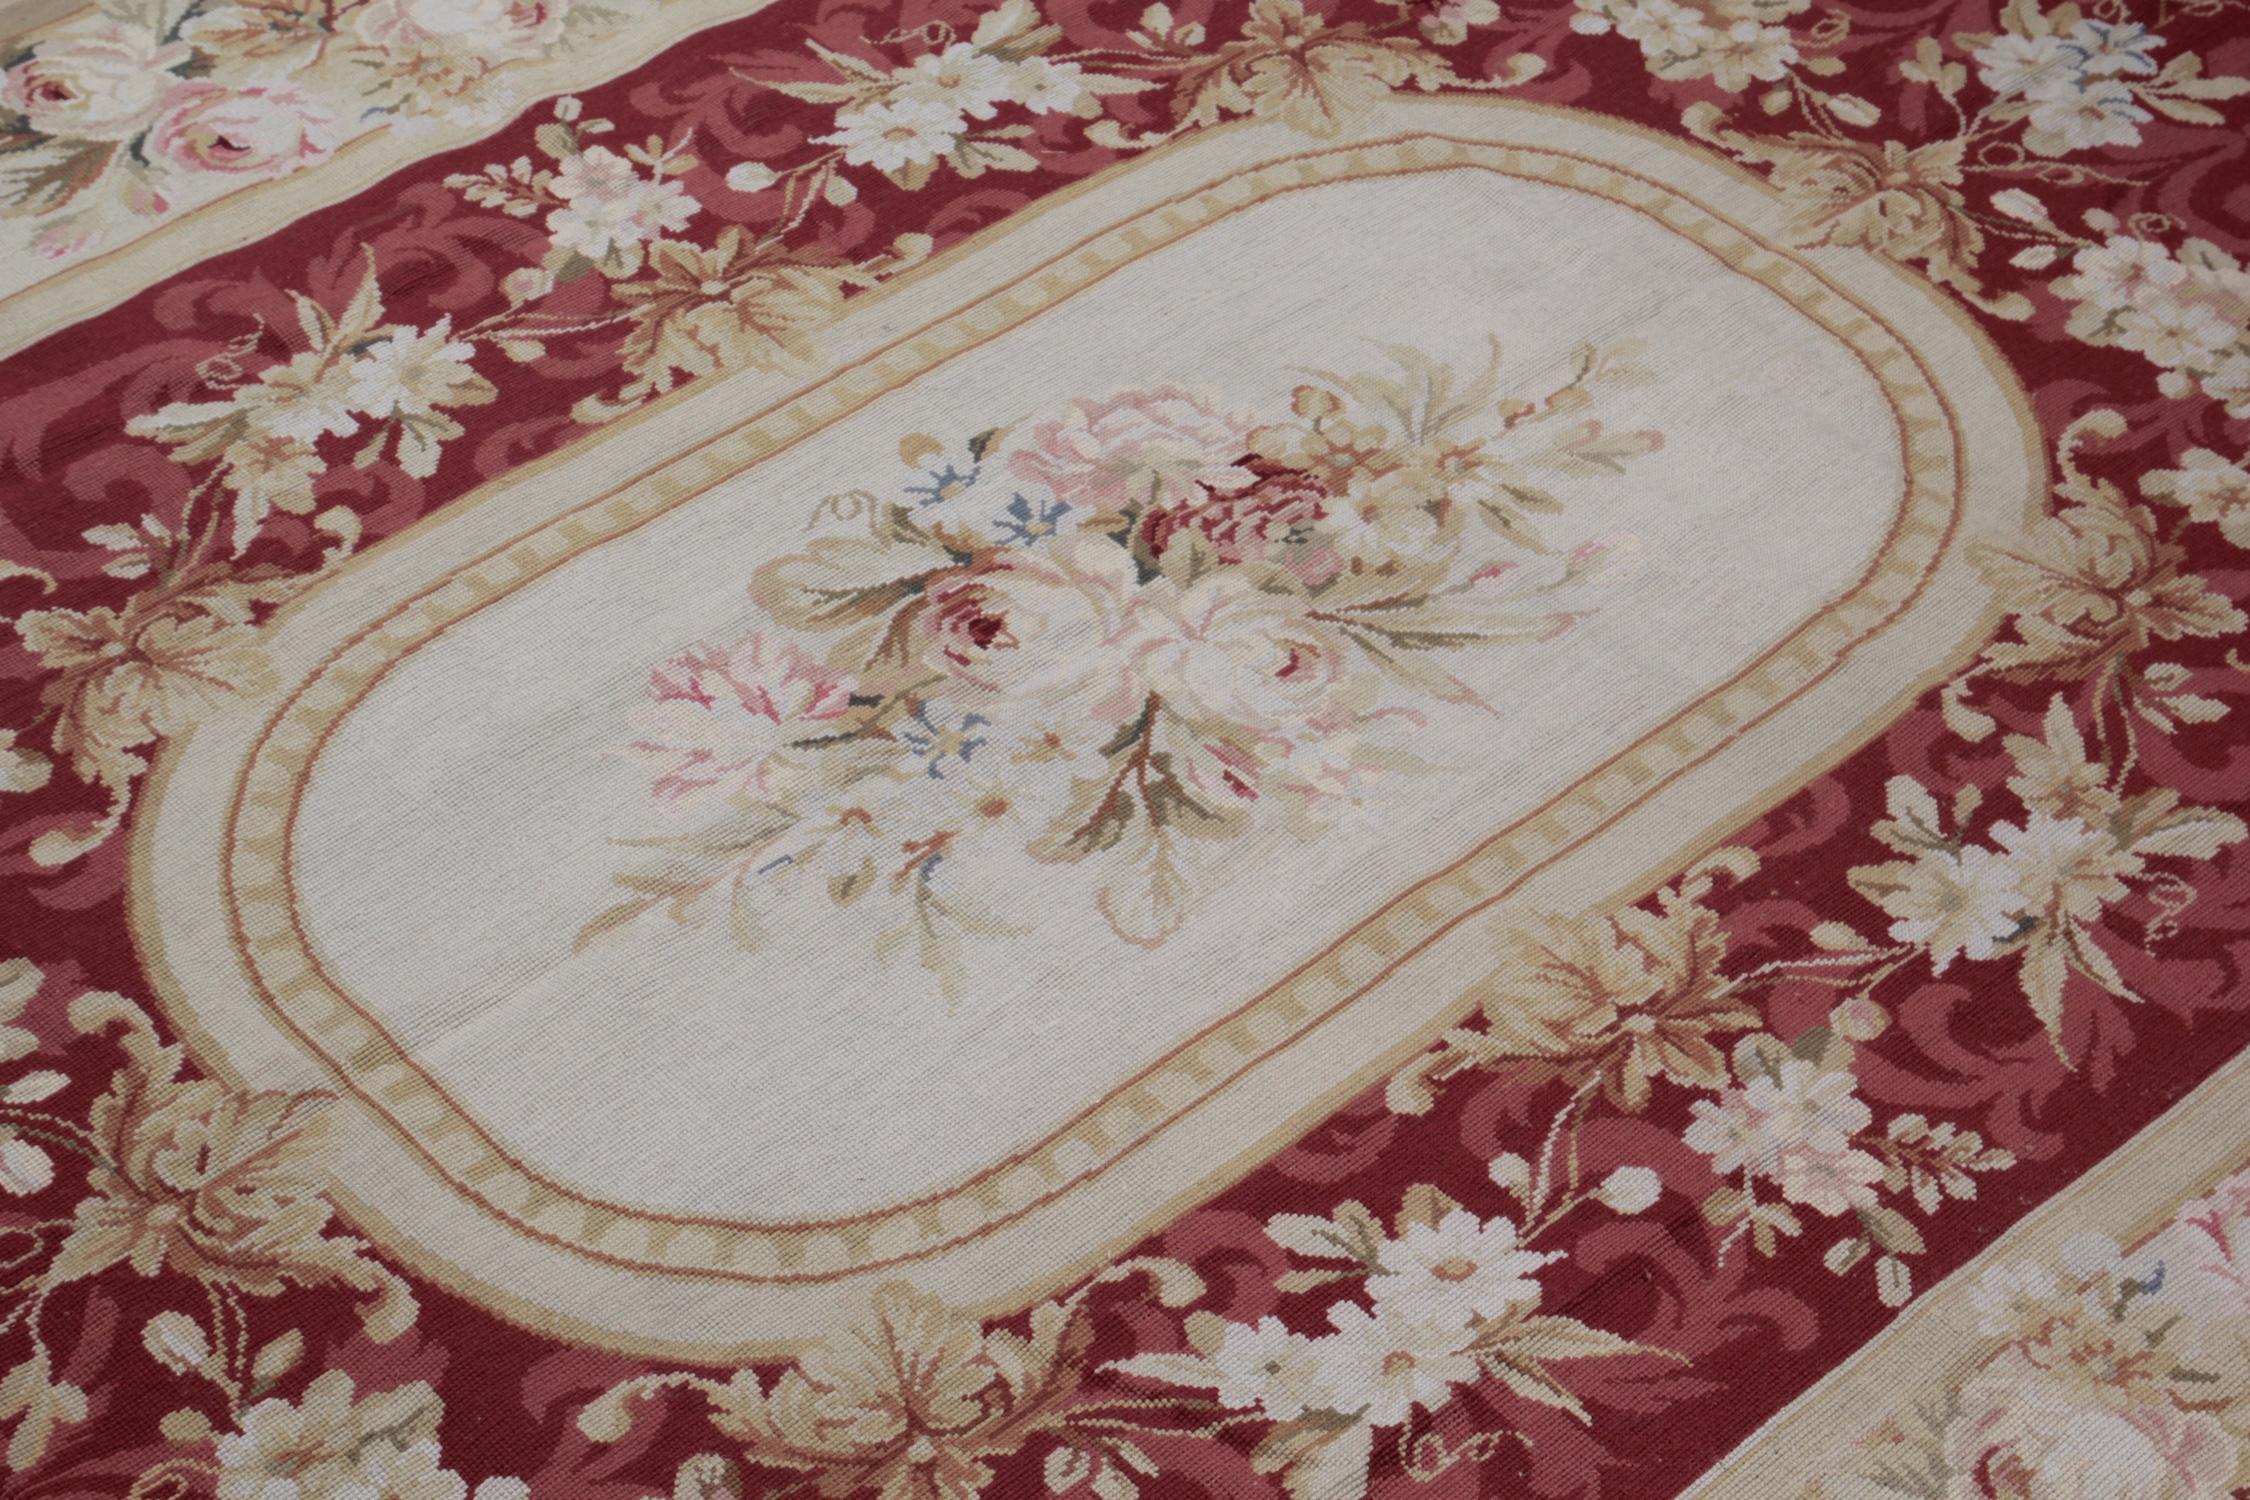 Late 20th Century Traditional Handwoven Floral Tapestry, French Design Aubusson Style Needlepoint